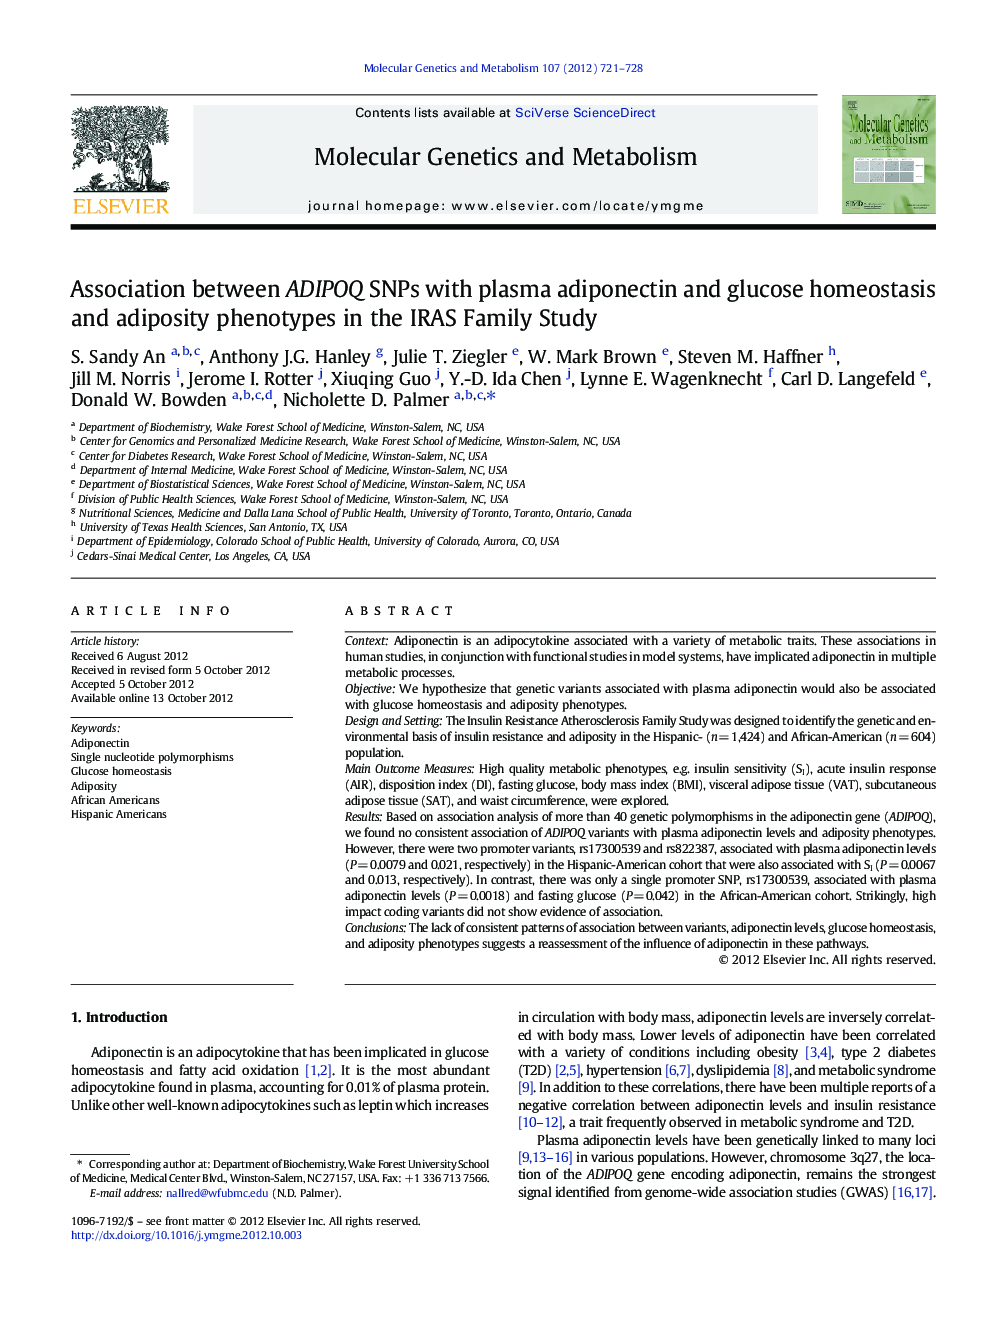 Association between ADIPOQ SNPs with plasma adiponectin and glucose homeostasis and adiposity phenotypes in the IRAS Family Study